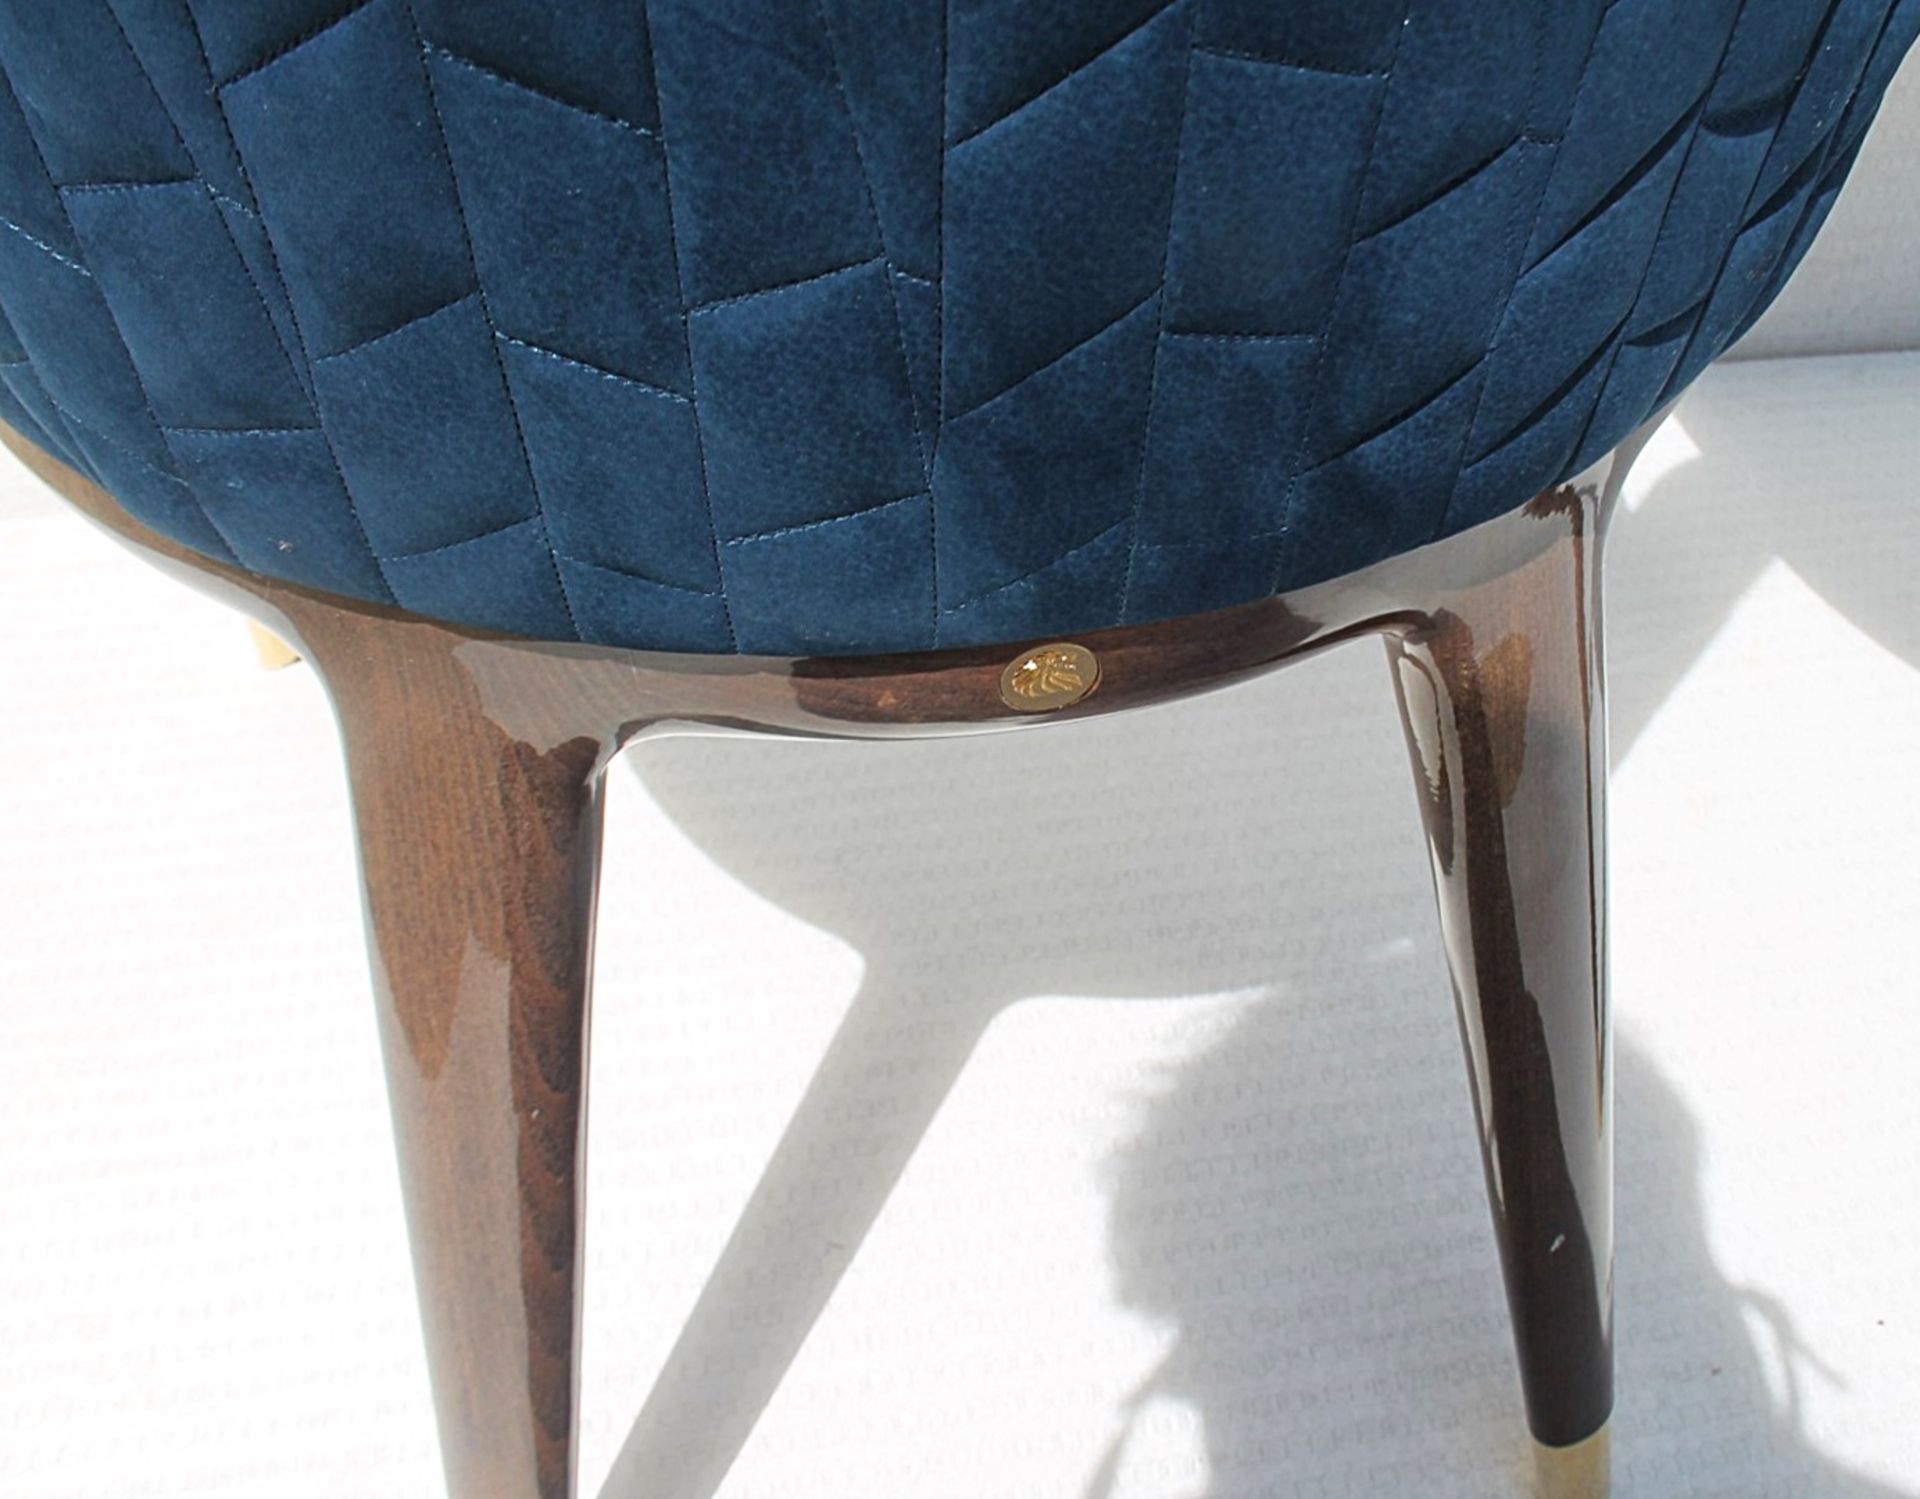 6 x GIORGIO COLLECTION 'Charisma' Luxury Dining Side Chairs In Blue - Total Original Price £15,330 - Image 7 of 17